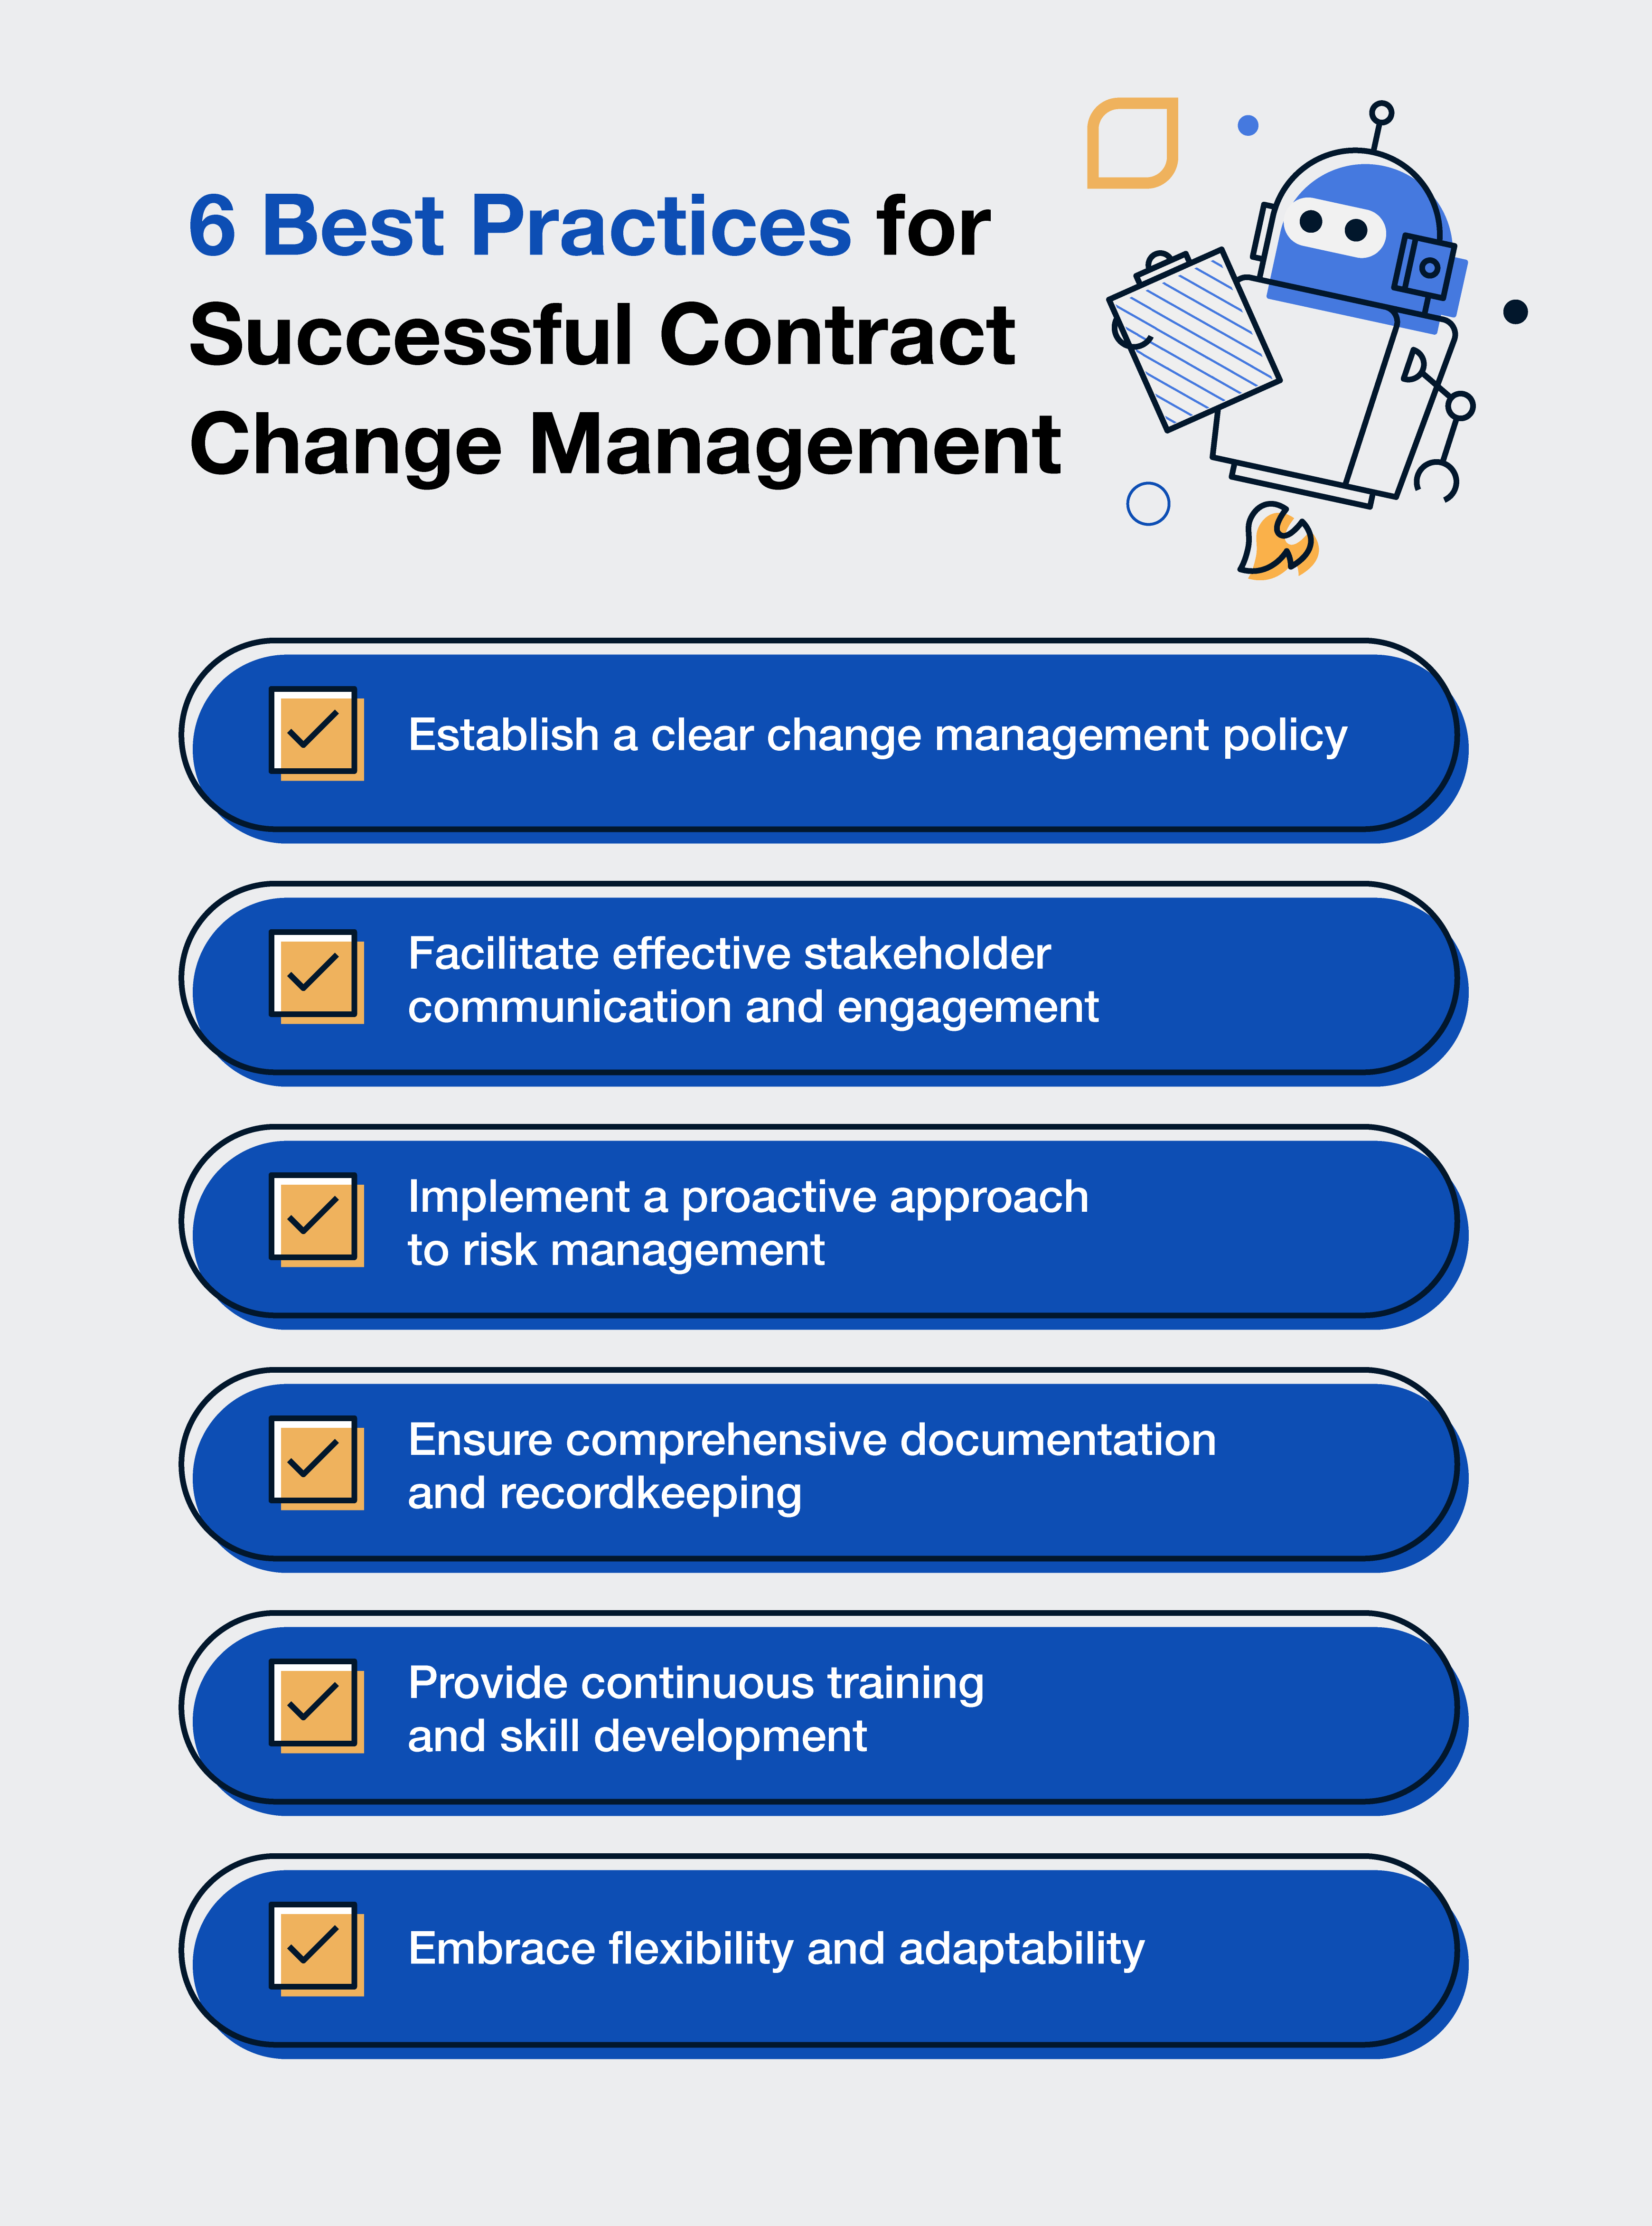 Illustrated chart showing 6 best practices for successful contract change management.